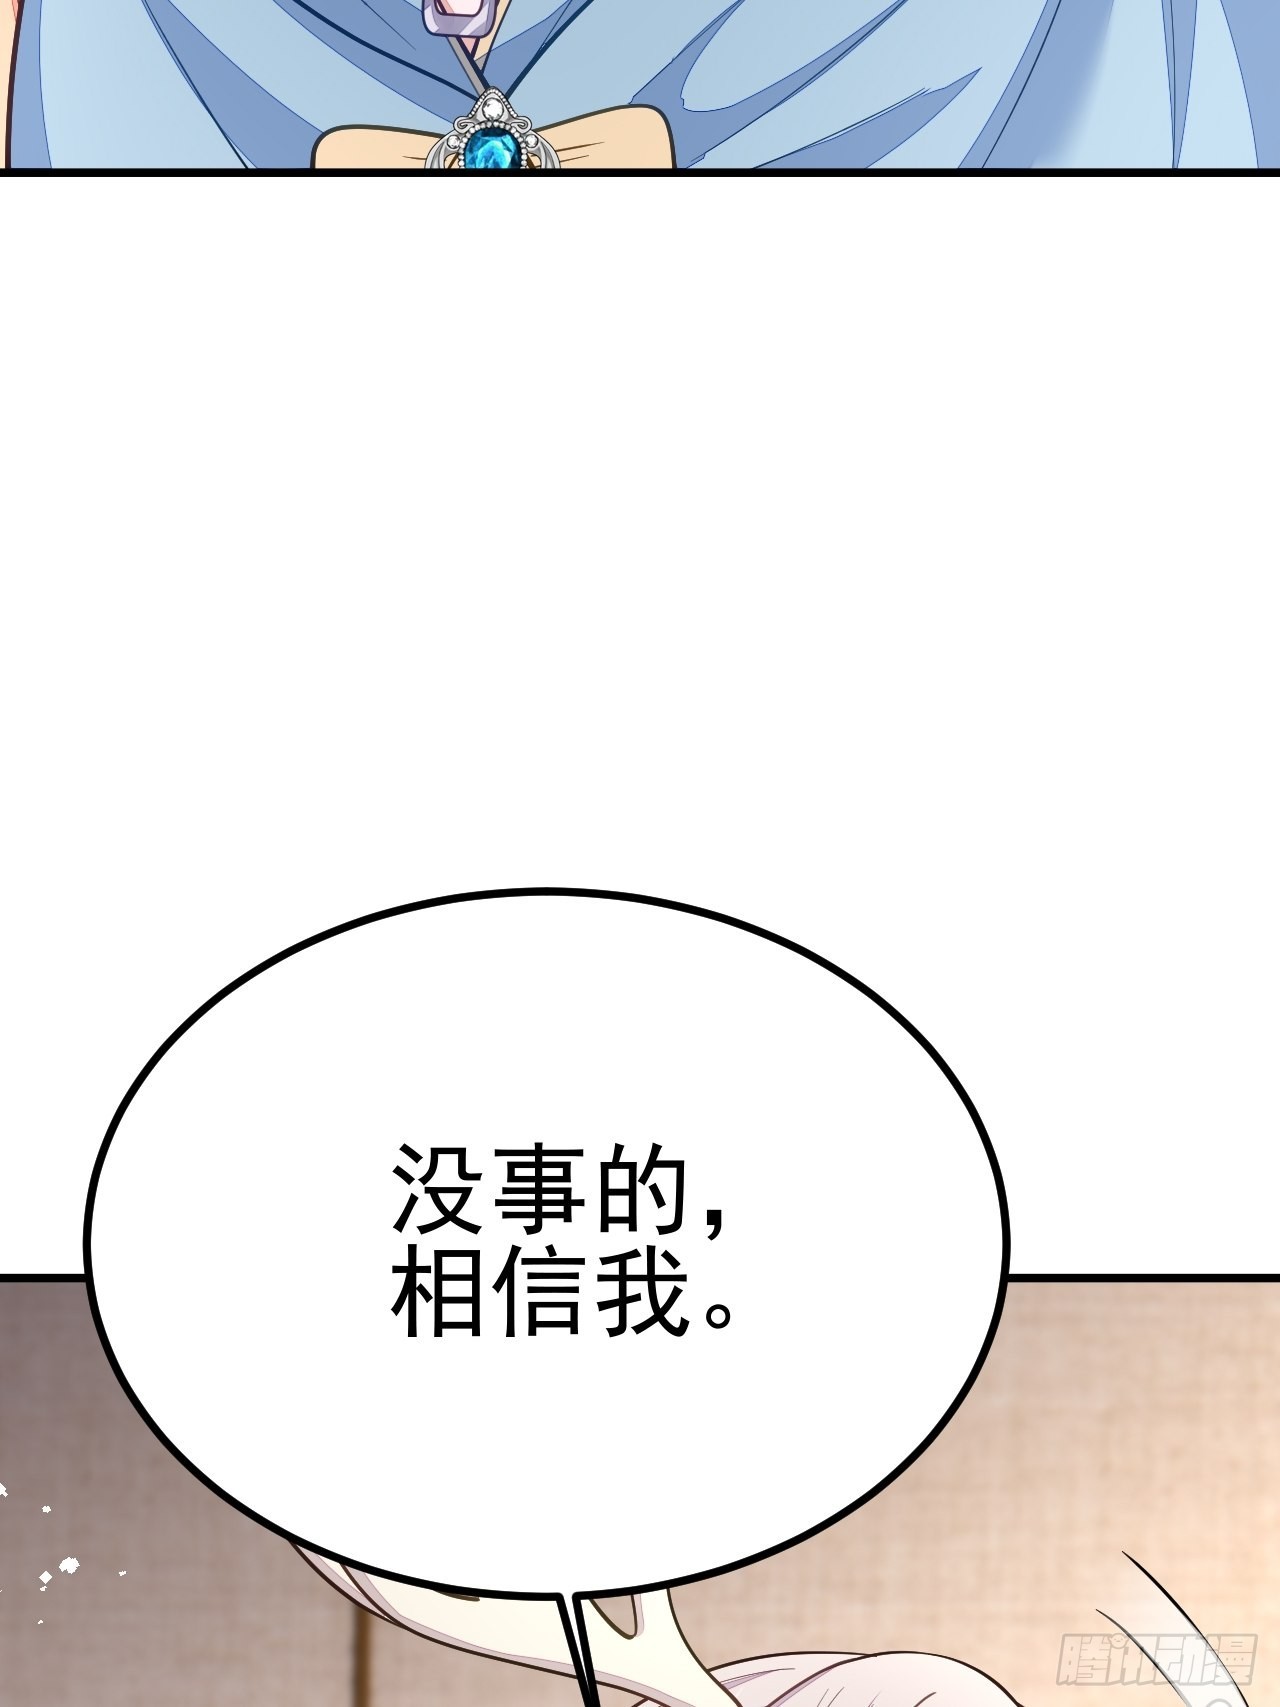 無常4843號 - 第44話(2/2) - 6